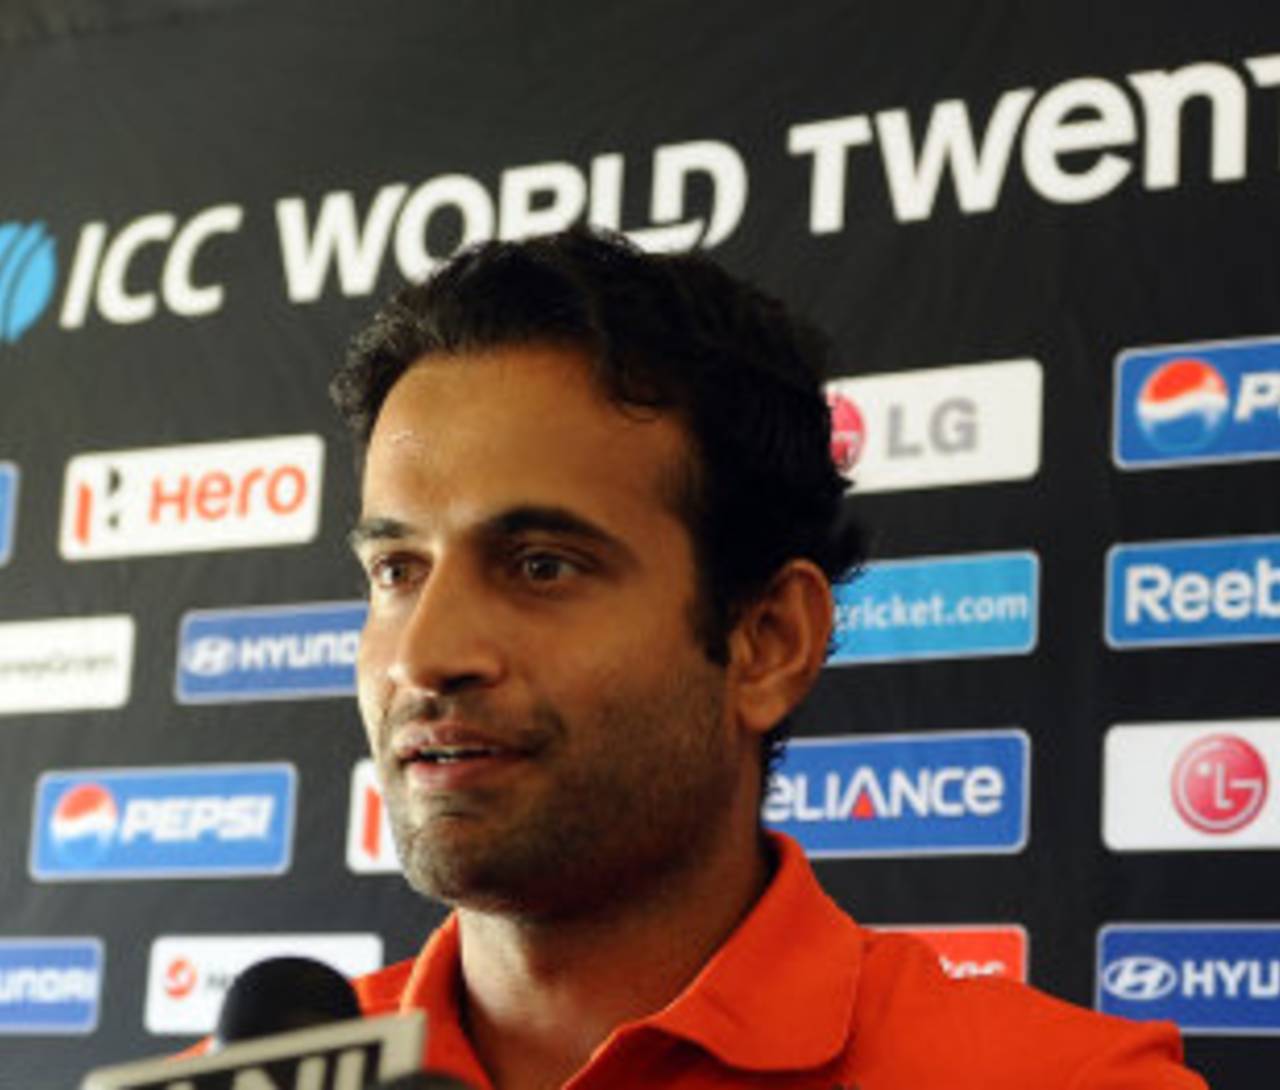 Irfan Pathan faces the press, ICC World Twenty20, Colombo, September 14, 2012